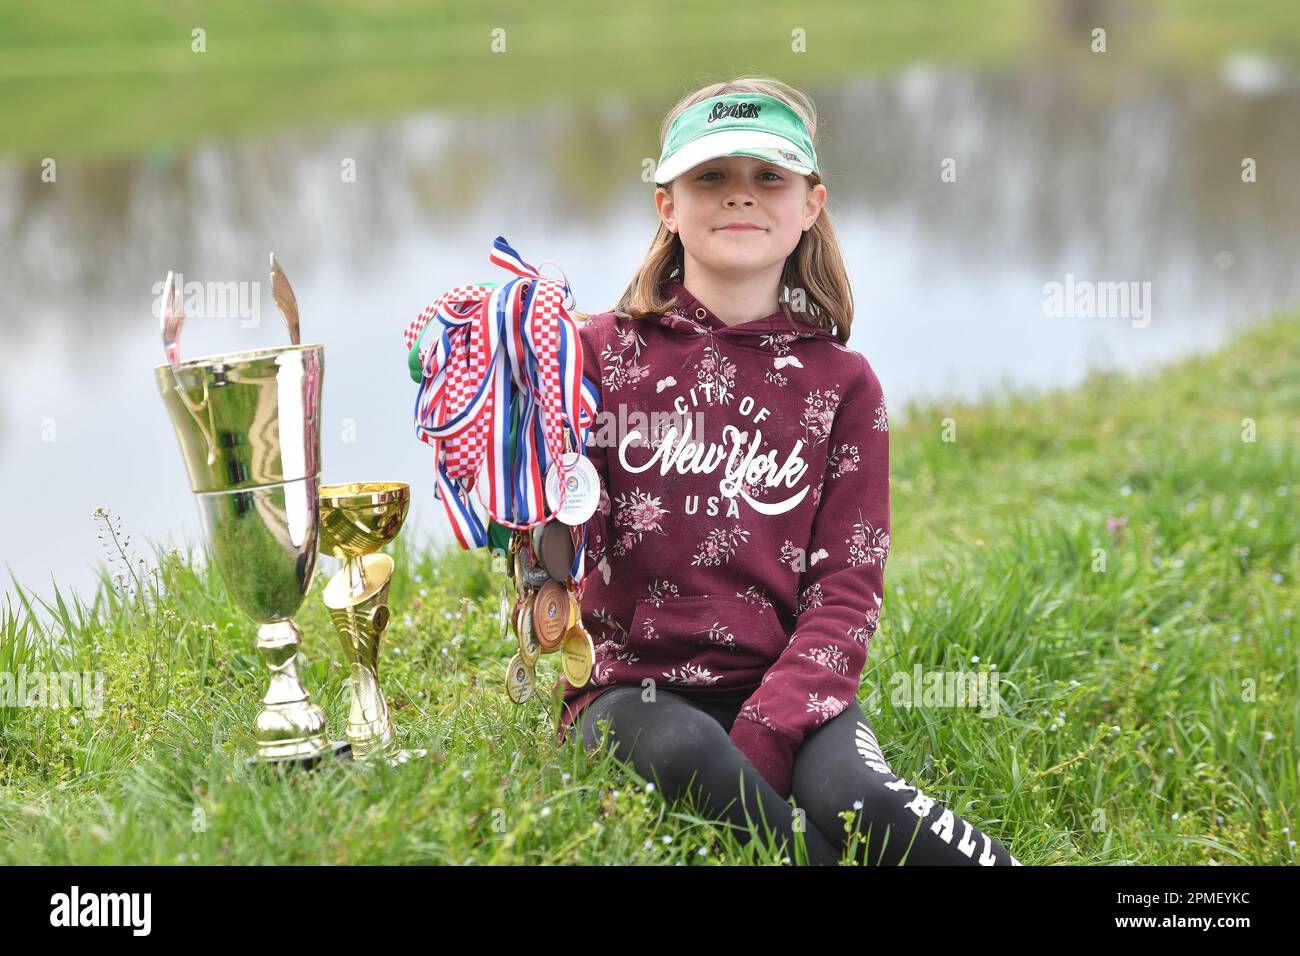 https://c8.alamy.com/comp/2PMEYKC/ten-year-old-girl-hana-horvat-from-prelog-is-one-of-the-greatest-fishing-talents-of-medjimurje-at-only-9-years-old-she-caught-and-pulled-out-and-released-a-4-kilogram-floundering-carp-by-herself-her-fishing-story-began-during-the-coronavirus-pandemic-when-she-was-8-years-old-father-darijo-a-former-amateur-fisherman-took-her-and-her-brother-fishing-on-huberts-grab-in-prelog-she-didnt-catch-anything-that-time-her-older-brother-ivan-16-had-better-luck-so-hana-told-her-father-that-she-wanted-to-try-againhana-has-been-doing-sport-fishing-for-less-than-three-years-it-all-started-duri-2PMEYKC.jpg